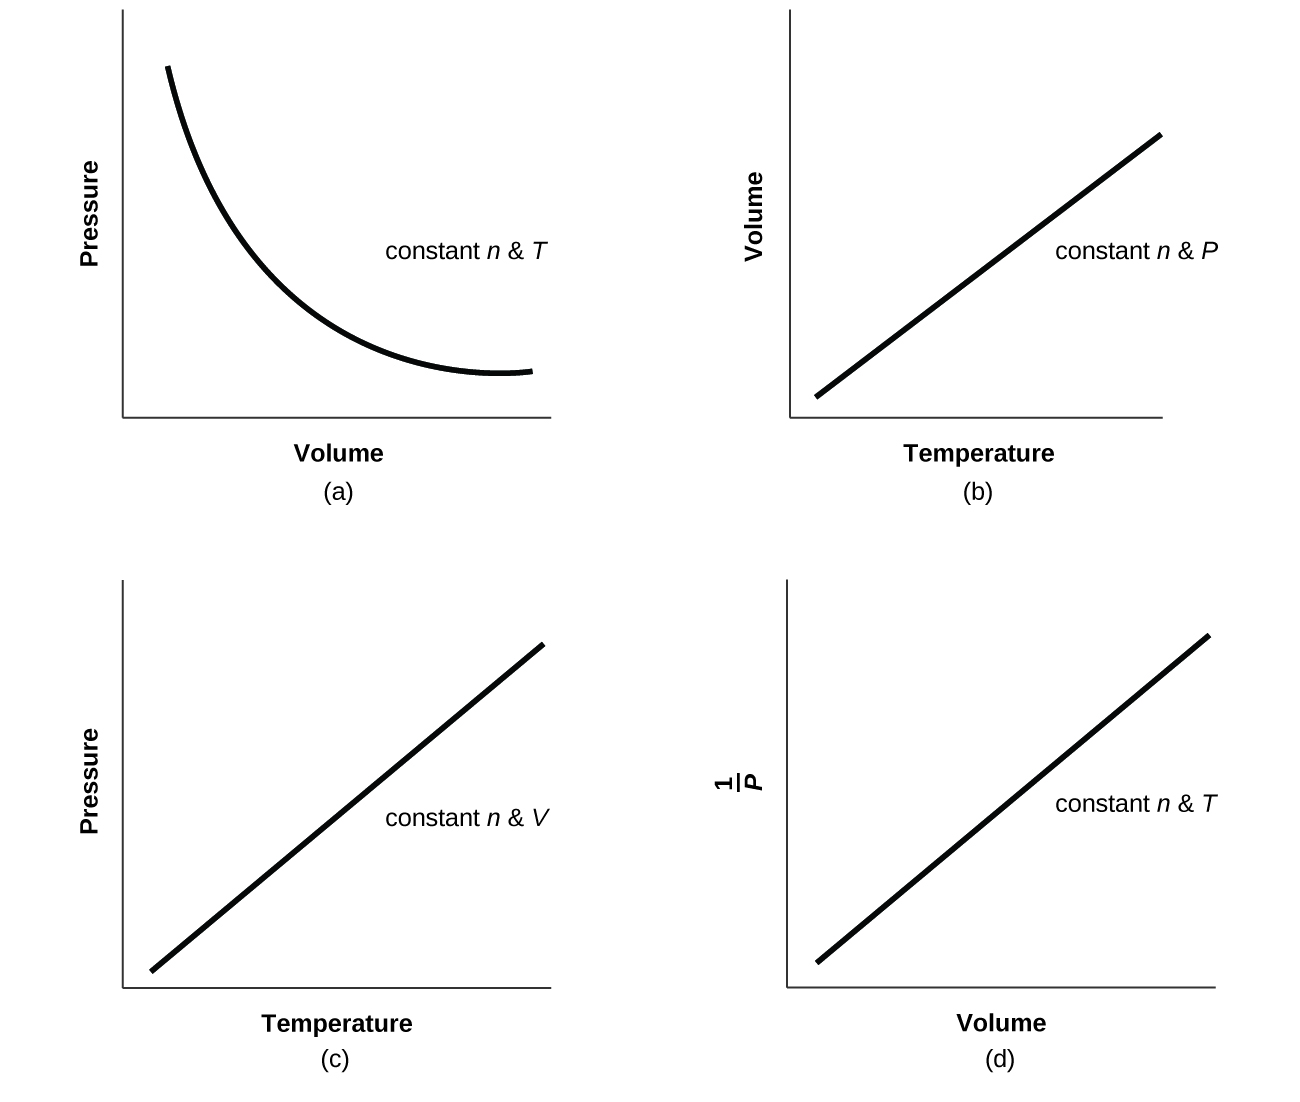 Four graphs are shown. In a, Volume is on the horizontal axis and Pressure is on the vertical axis. A downward trend with a decreasing rate of change is shown by a curved line. The label n, P cons is shown on the graph. In b, Temperature is on the horizontal axis and Volume is on the vertical axis. An increasing linear trend is shown by a straight line segment. The label n, P cons is shown on the graph. In c, Temperature is on the horizontal axis and Pressure is on the vertical axis. An increasing linear trend is shown by a straight line segment. The label n, P cons is shown on the graph. In d, Volume is on the horizontal axis and 1 divided by Pressure is on the vertical axis. An increasing linear trend is shown by a straight line segment on the graph. The label n, P cons is shown on the graph.